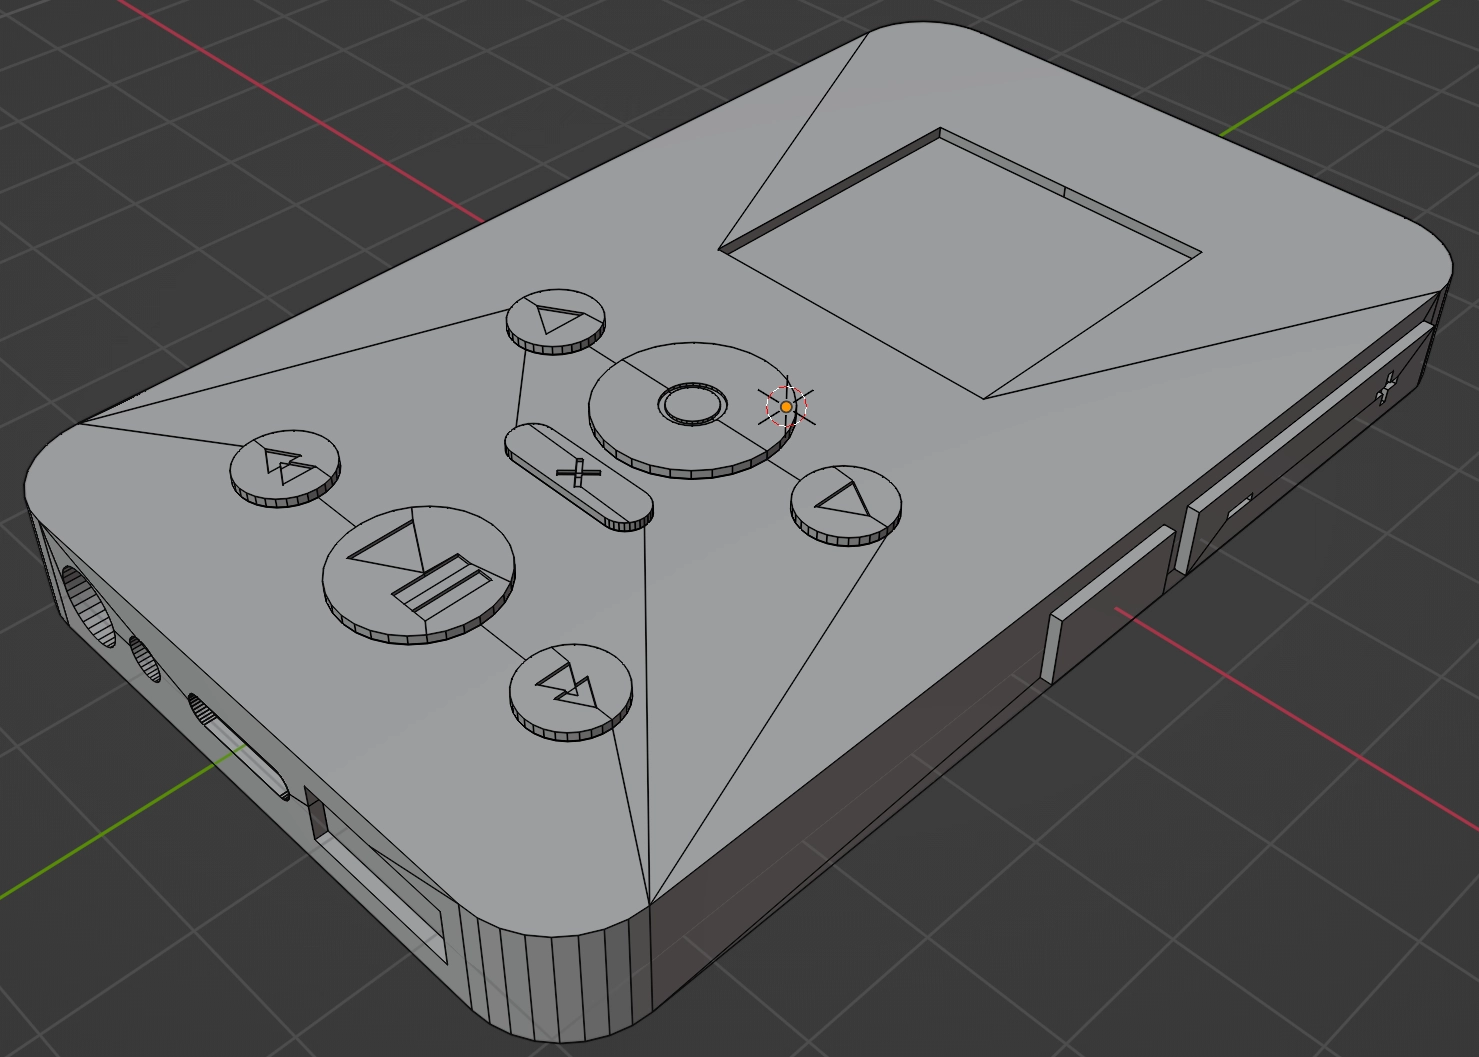 a blender model of a rectangular device with buttons and a screen